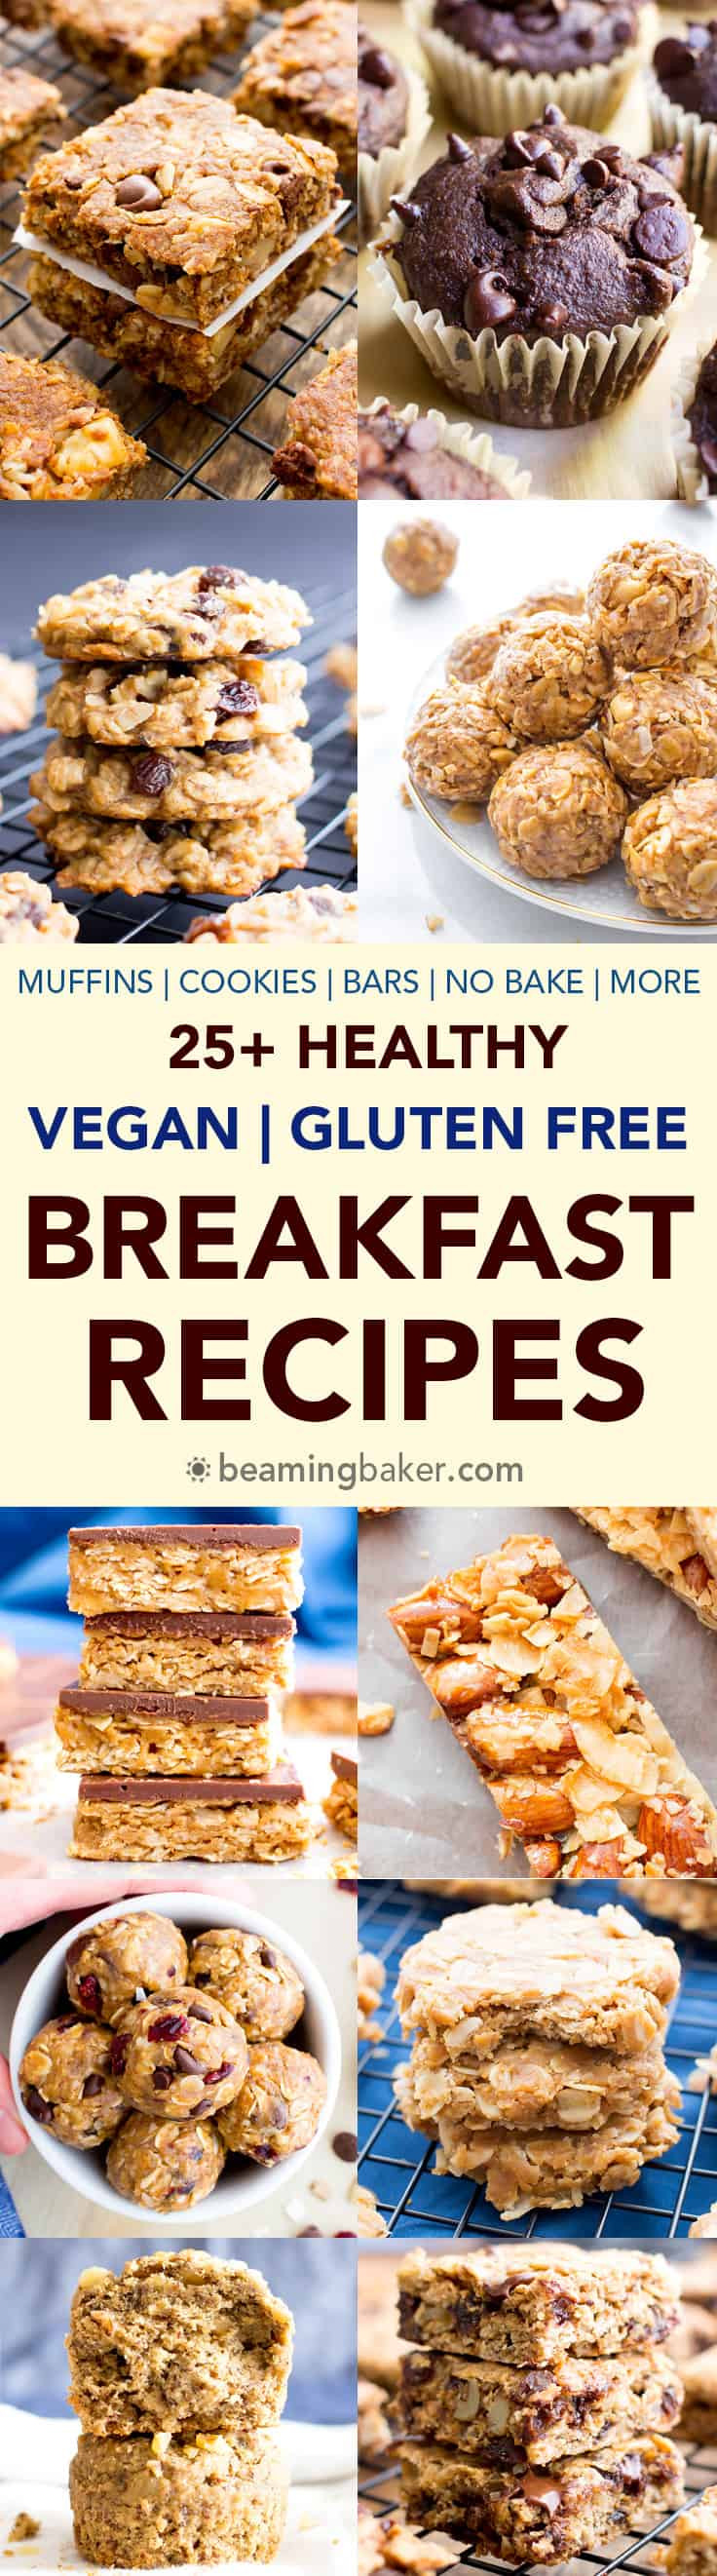 Gluten And Dairy Free Breakfast Recipes 25 Healthy Gluten Free Breakfast Recipes Vegan GF